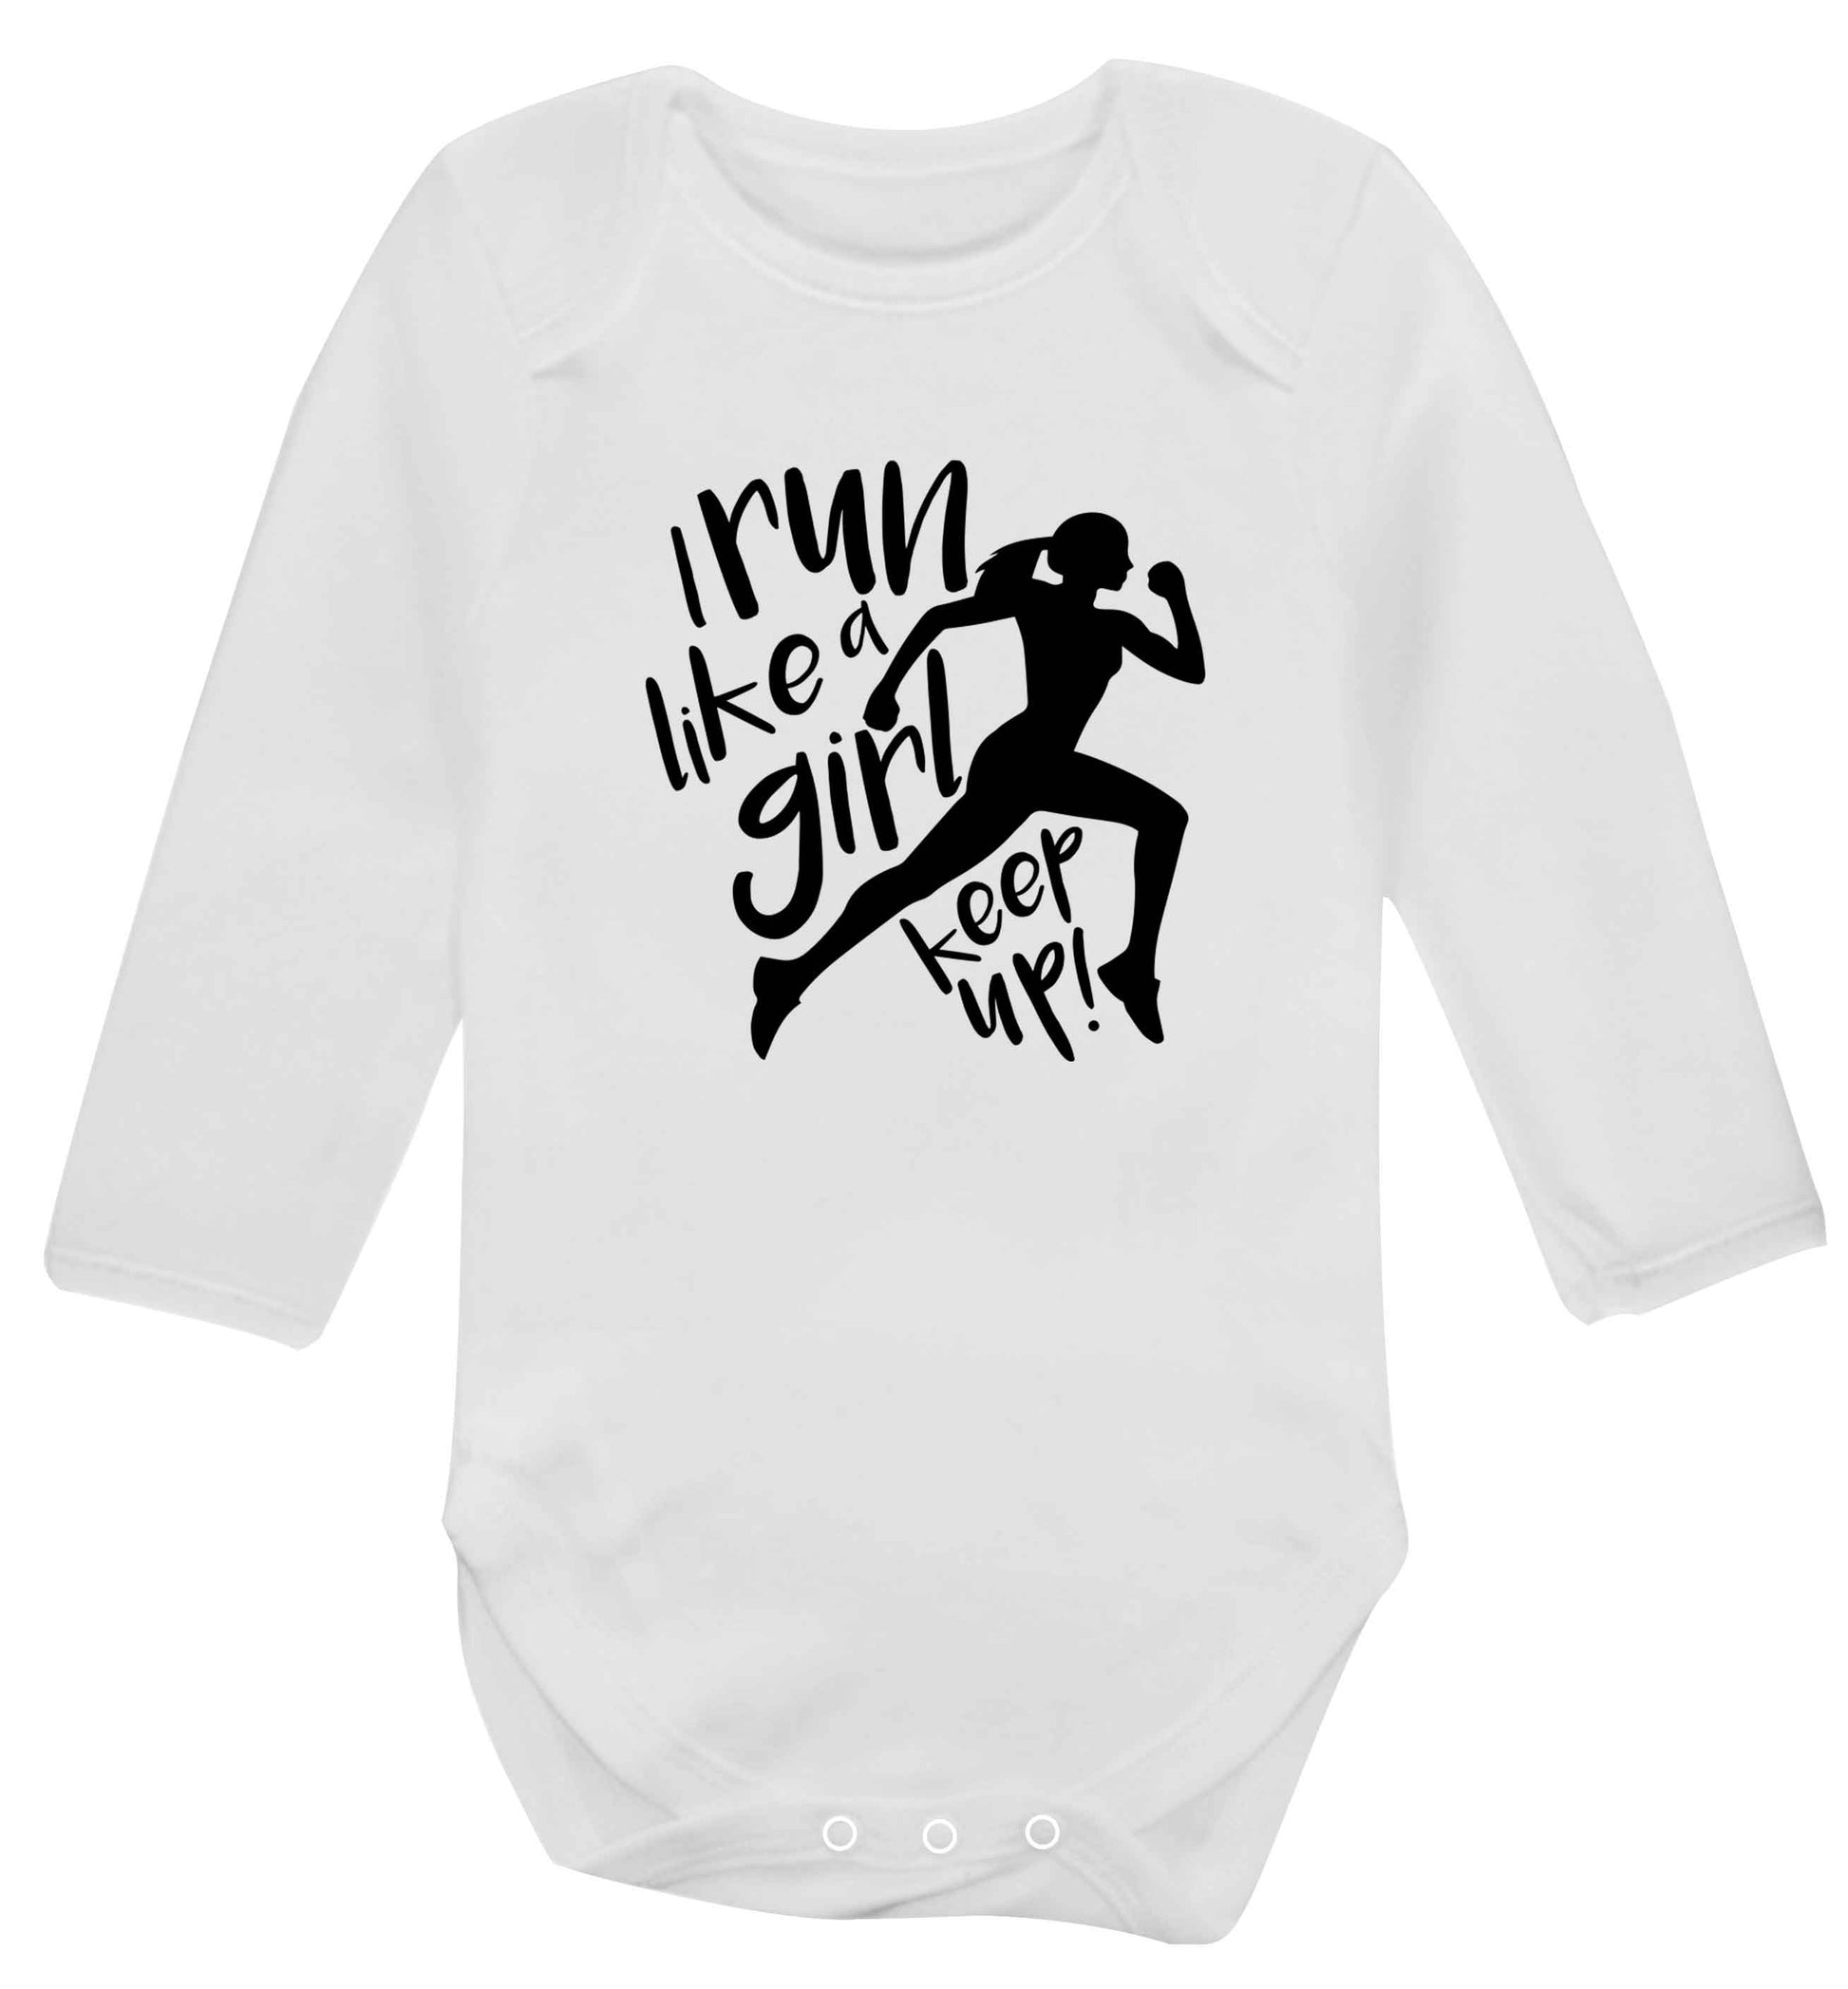 I run like a girl, keep up! baby vest long sleeved white 6-12 months